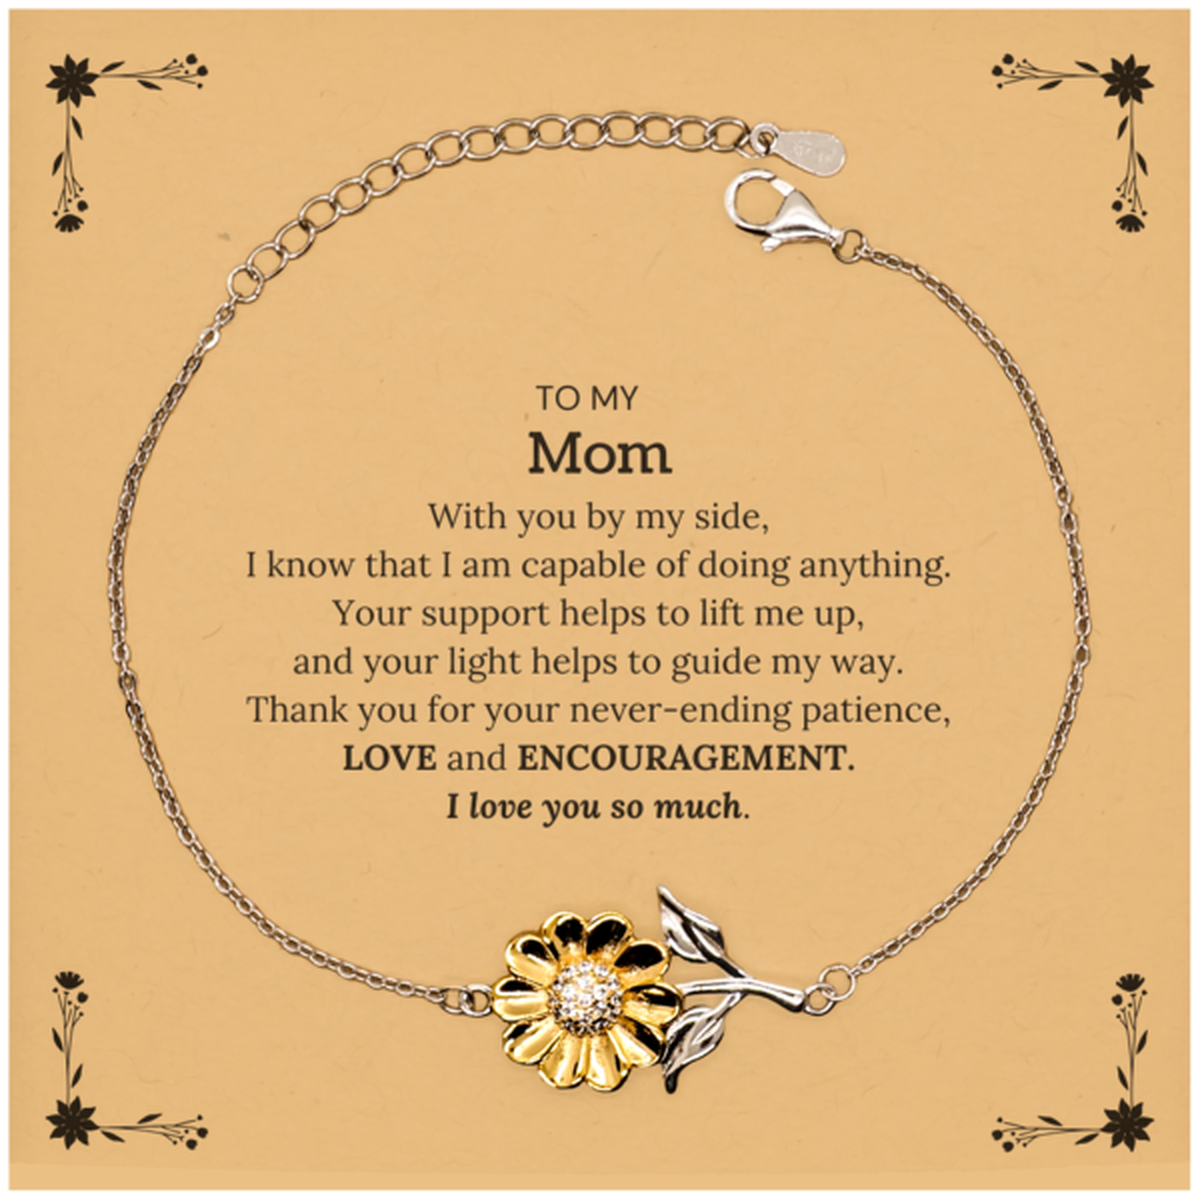 Appreciation Mom Sunflower Bracelet Gifts, To My Mom Birthday Christmas Wedding Keepsake Gifts for Mom With you by my side, I know that I am capable of doing anything. I love you so much